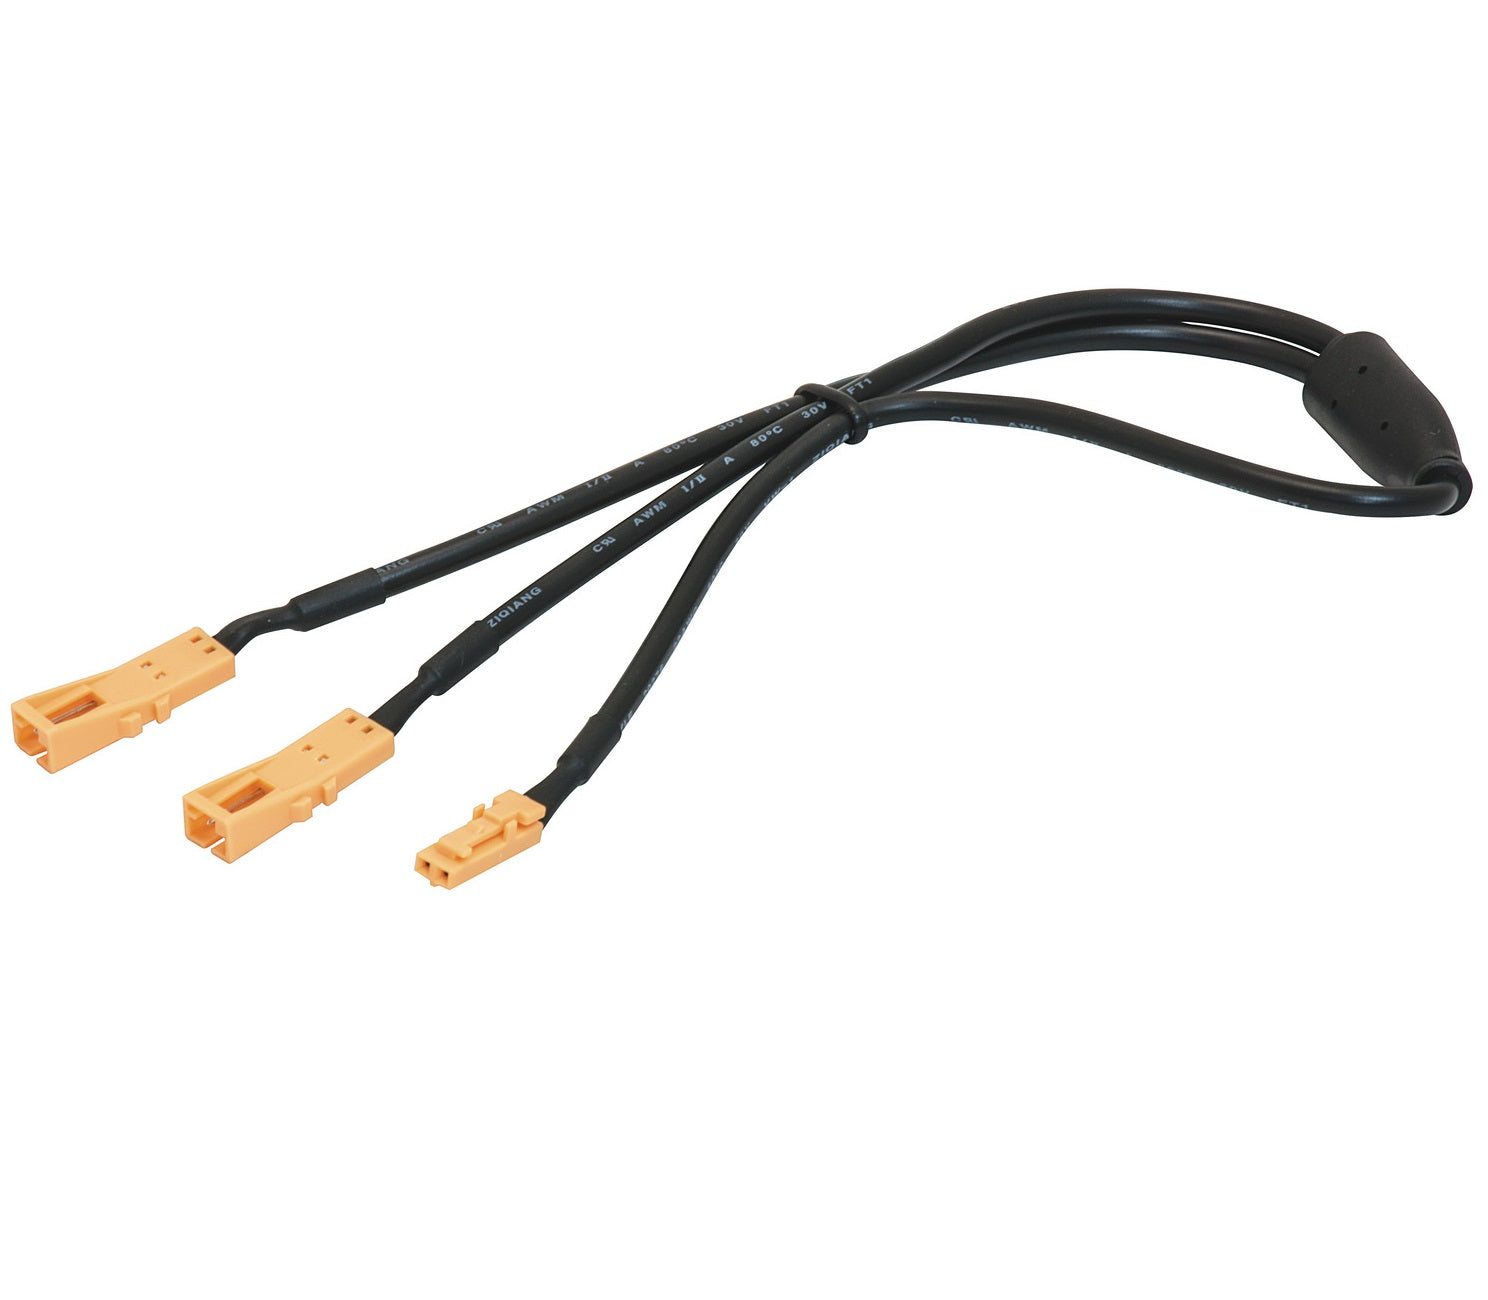 Hafele Loox 2-Way LED Power Lead Extension for 12V, 150 mm (5-7/8